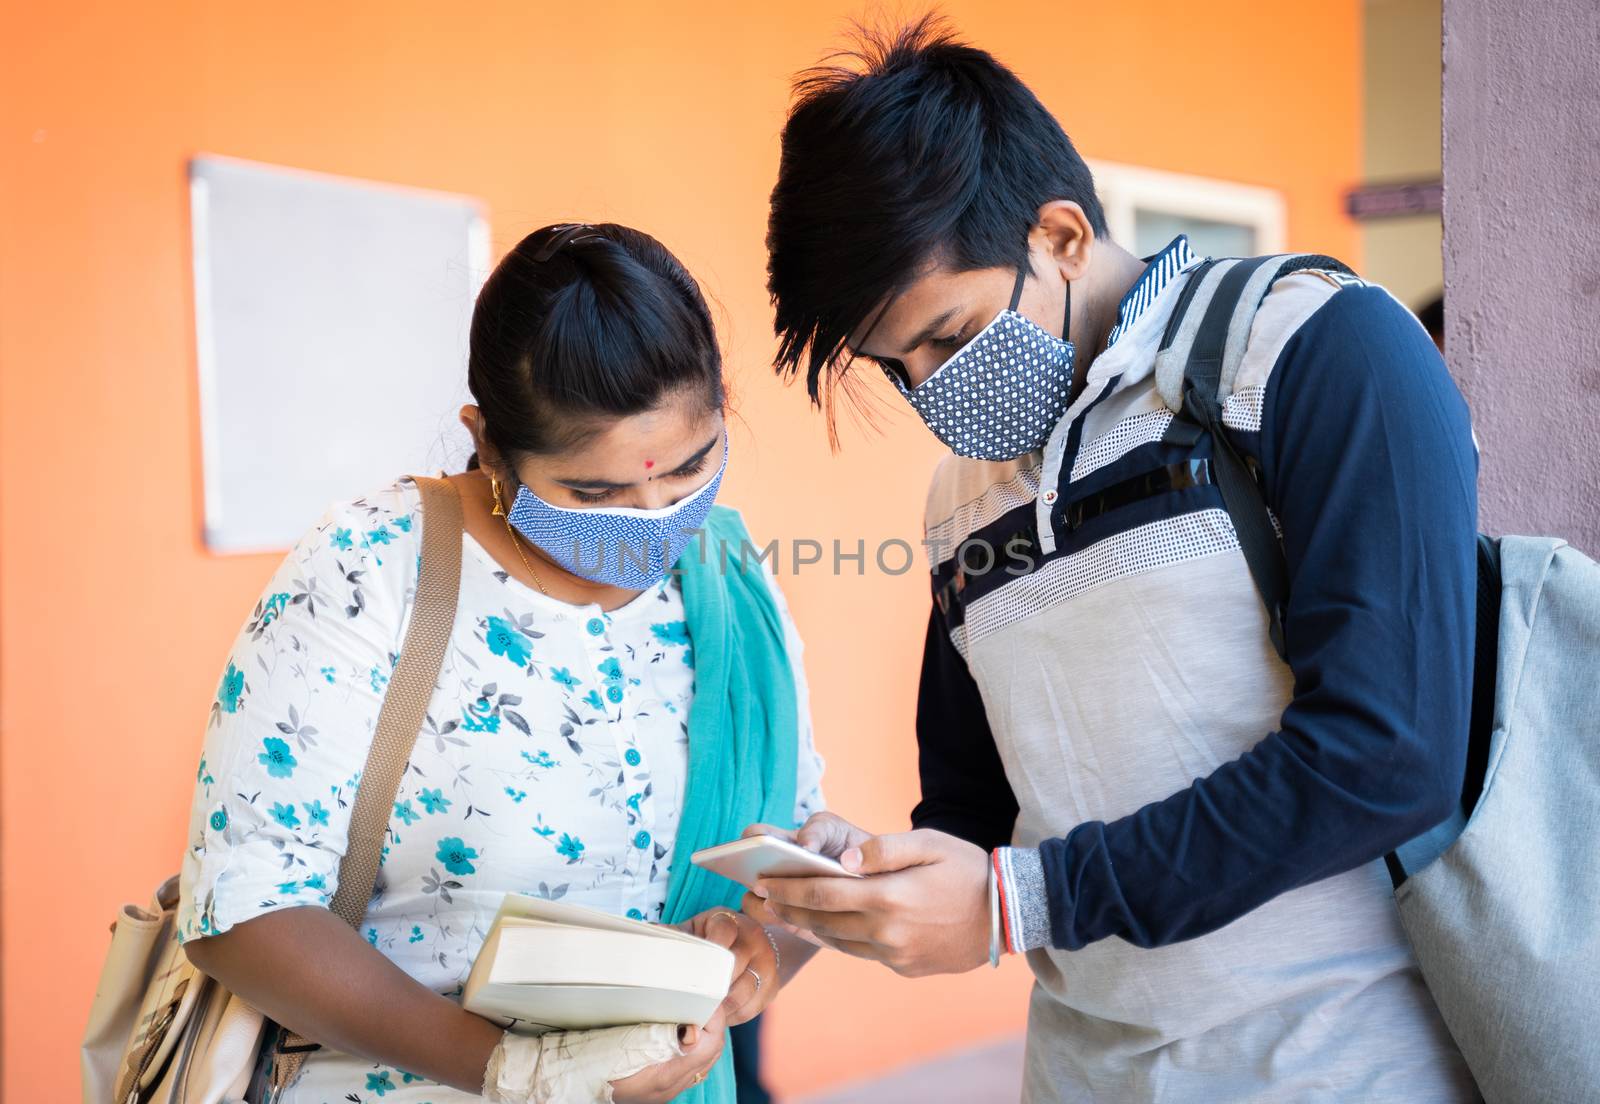 University students in medical mask busy on mobile phone at college corridor - concept of students using mobile, technology, Internet and college reopen after covid-19 coronavirus pandemic. by lakshmiprasad.maski@gmai.com